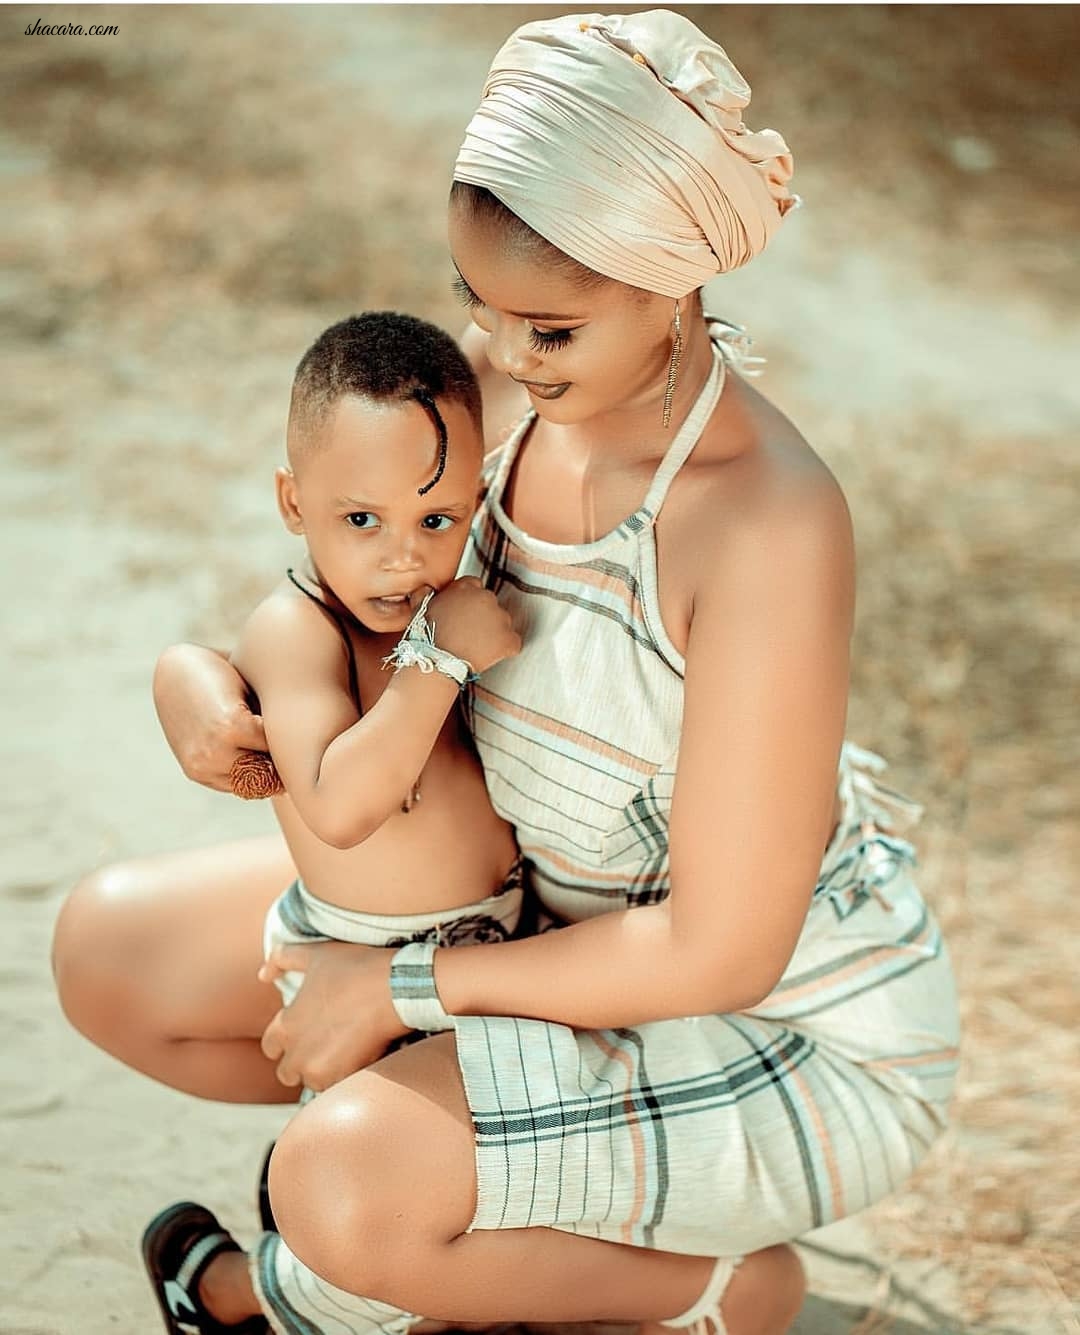 East Africa’s Viral & Most Beautiful StyleGirl Hamisa Introduces Her Son To The World Of Style Influencers